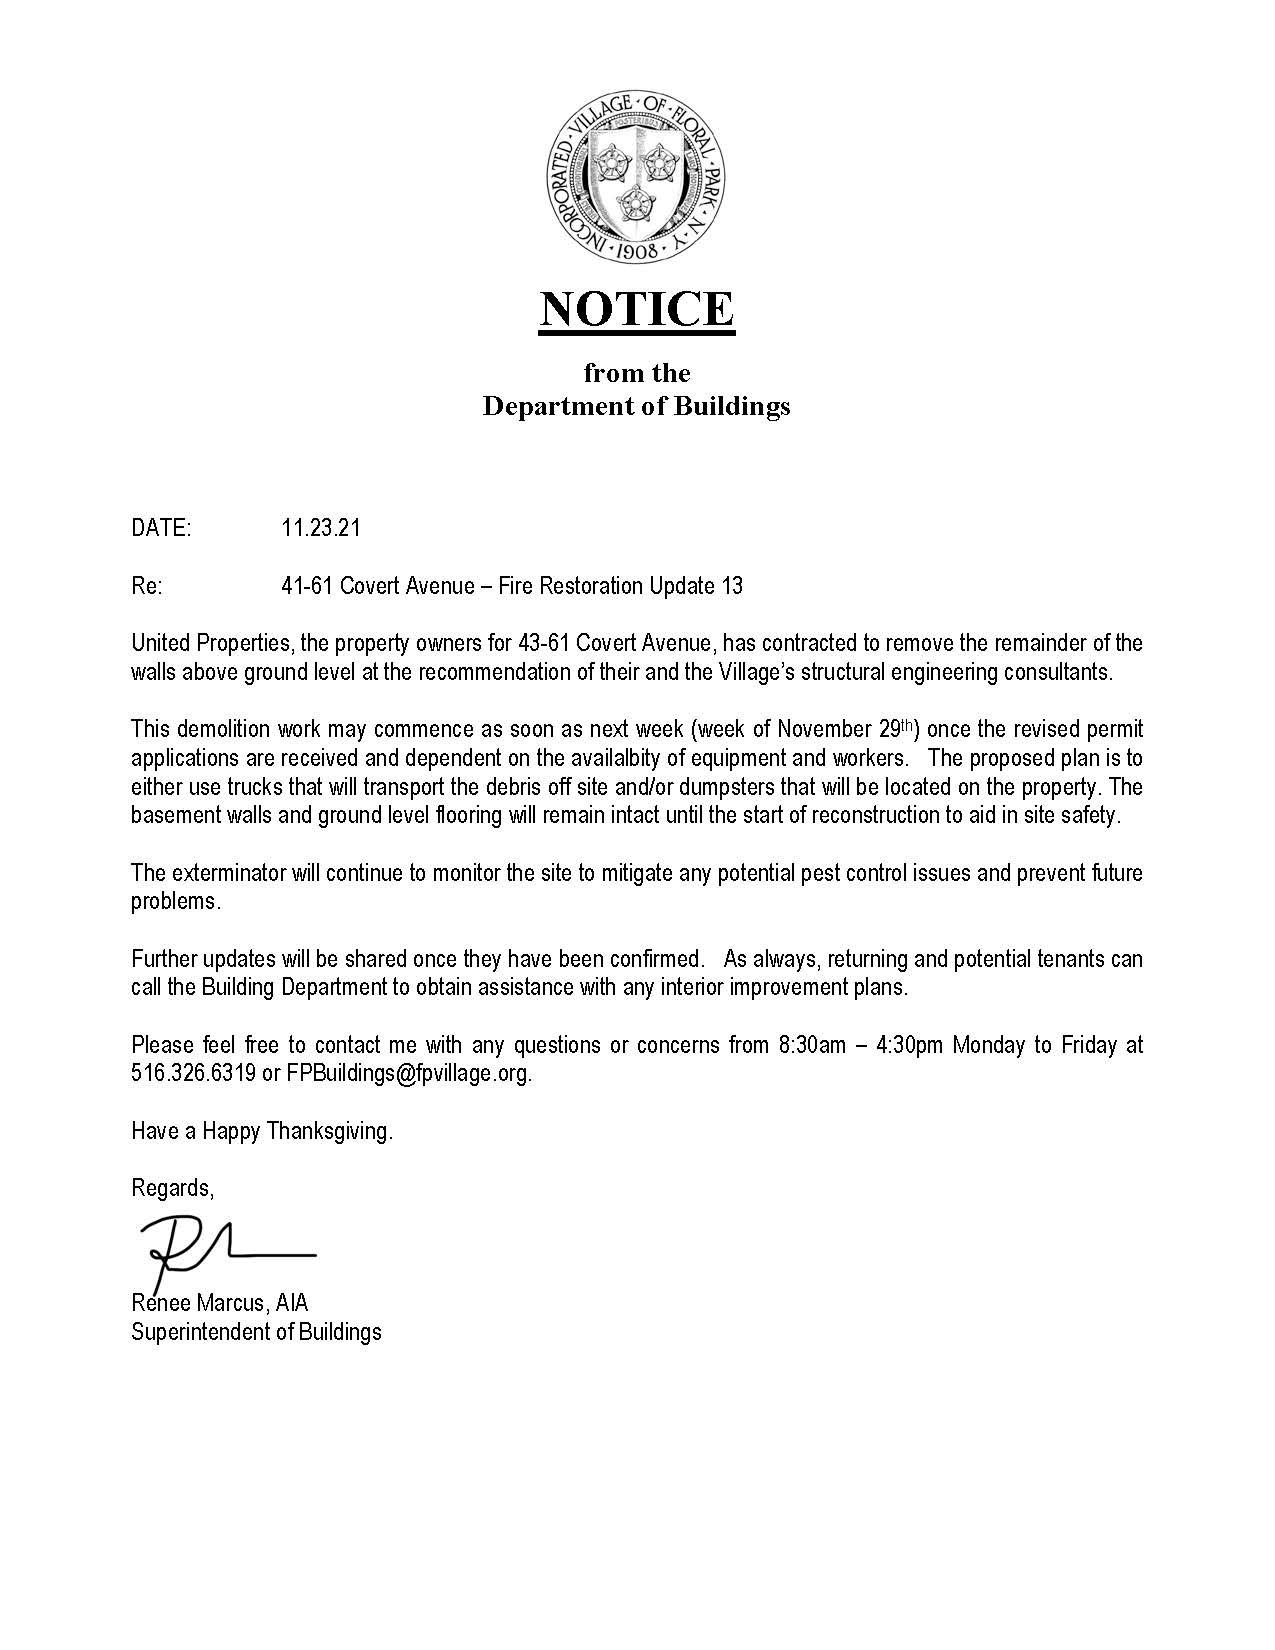 UPDATED: 11/23/2021- Building Department Notice for 41-61 Covert Avenue – Fire Restoration